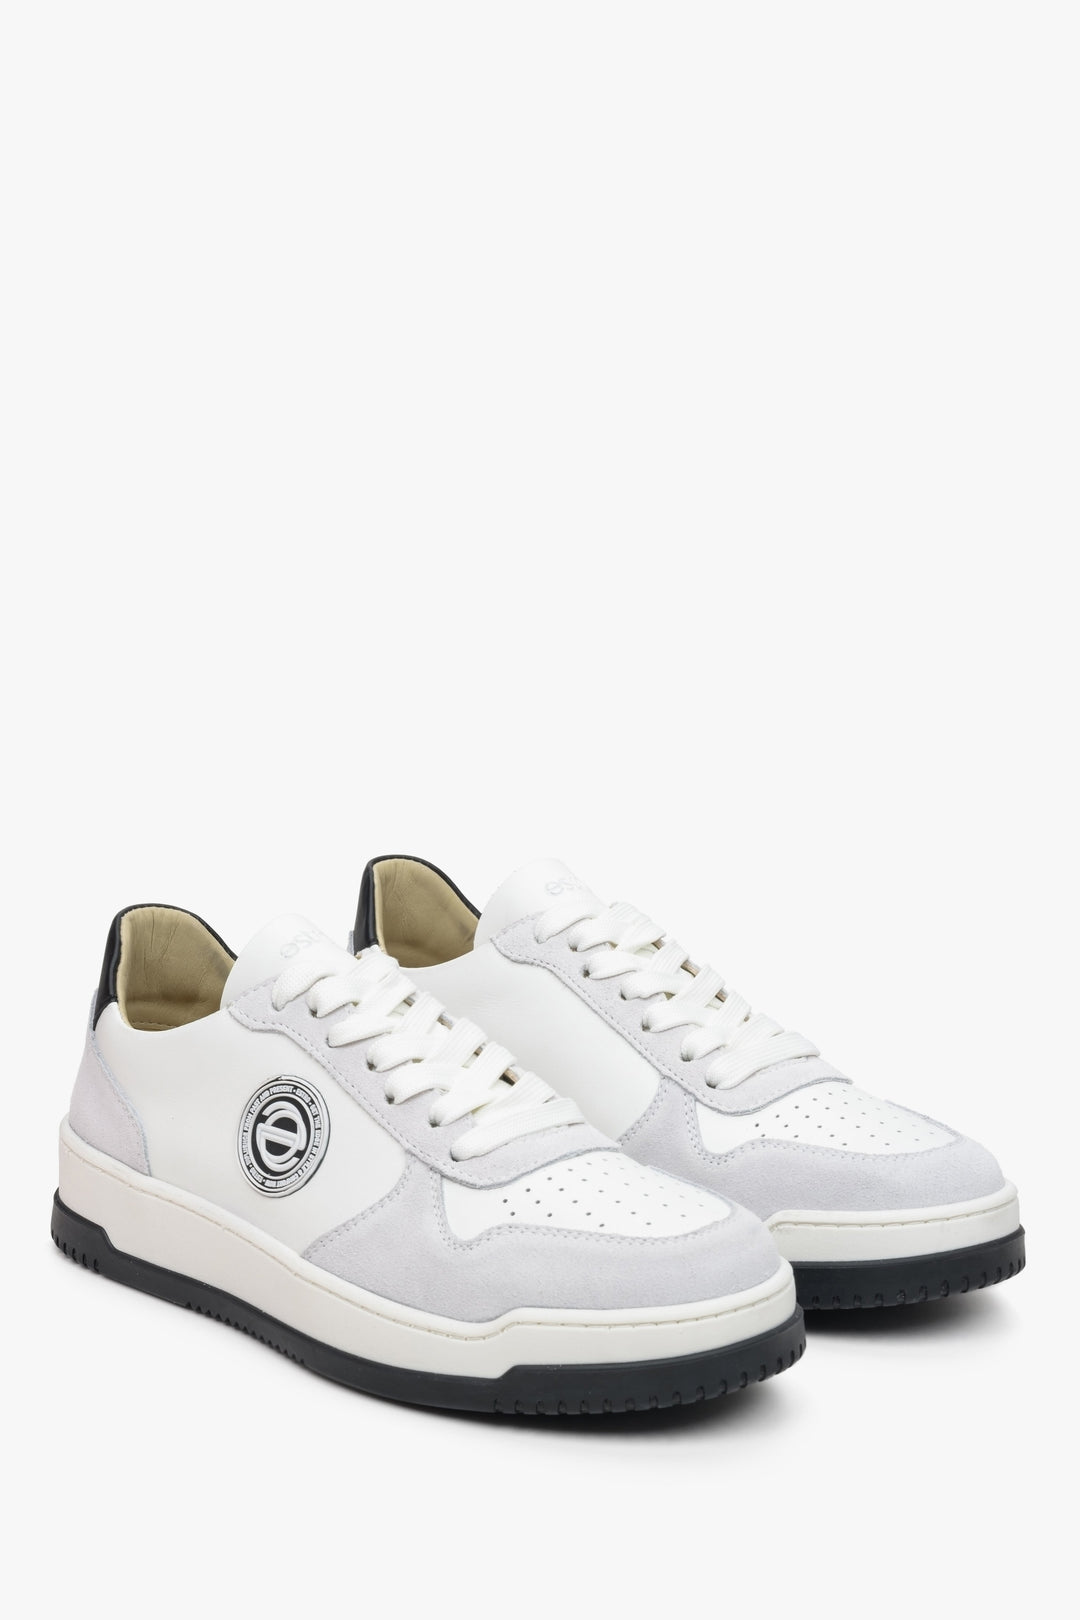 Estro women's leather sneakers in white and grey color.